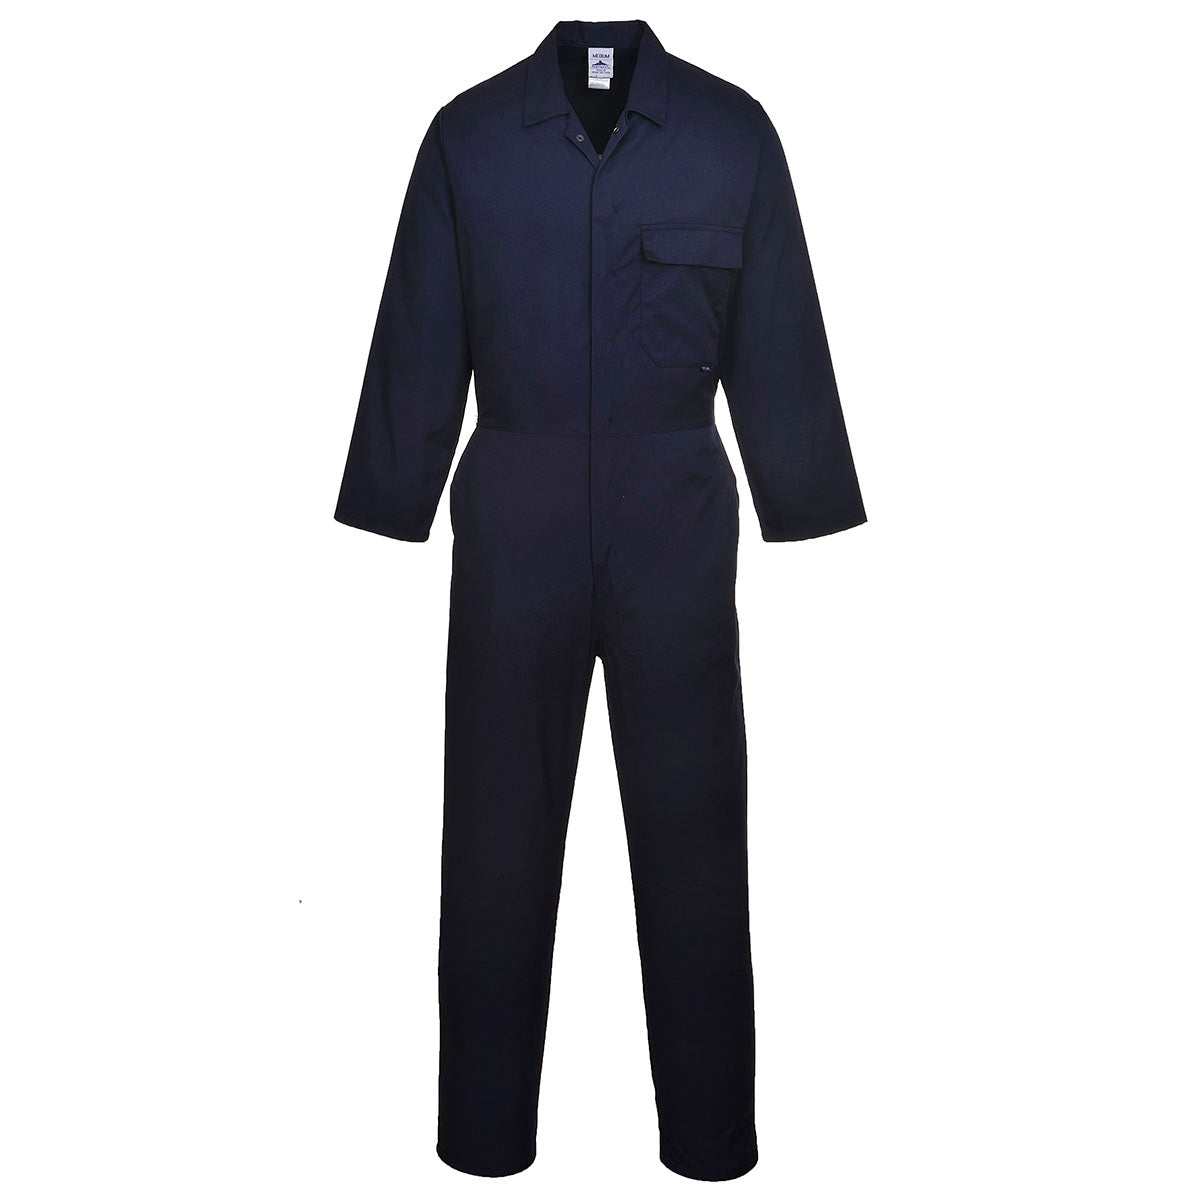 Portwest 2802 Standard Coverall Navy